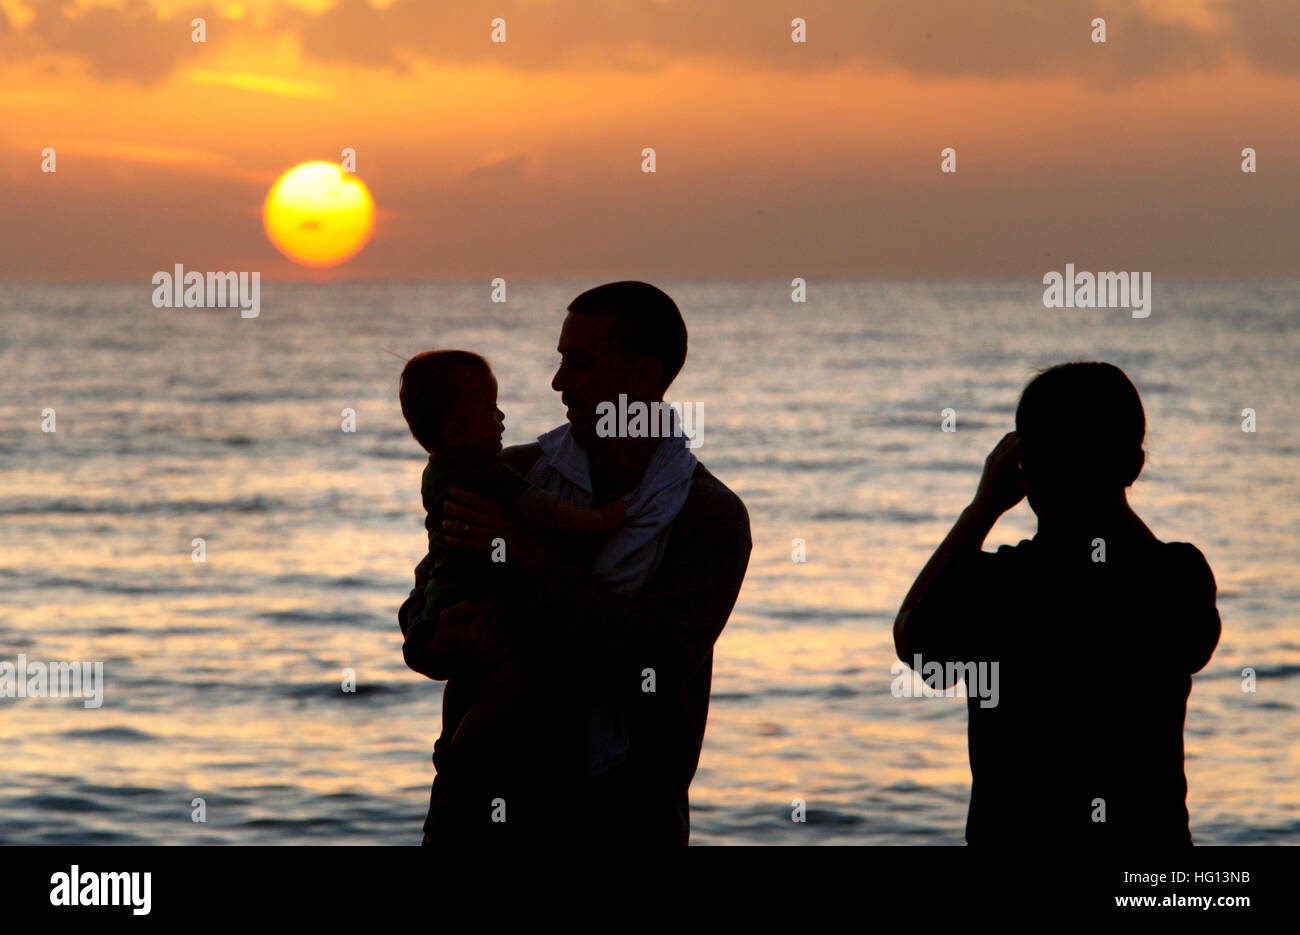 Florida, USA. 3rd Jan, 2017. 1010110 (Lannis Waters/The Palm Beach Post) LAKE WORTH - Jae Eun Kim (cq) takes a photo of her husband Lee Tanton (cq) and their son, Richard Kim Tanton (cq) at Lake Worth Municipal Beach as the sun rises New Years Day. It's Richard's first New Year; he was born January 2 last year. Jae says it is a tradition in her culture to greet the first sunrise of the year and make wishes for the new year, and she wants to continue the tradition here. The family lives in Lake Worth. © Lannis Waters/The Palm Beach Post/ZUMA Wire/Alamy Live News Stock Photo